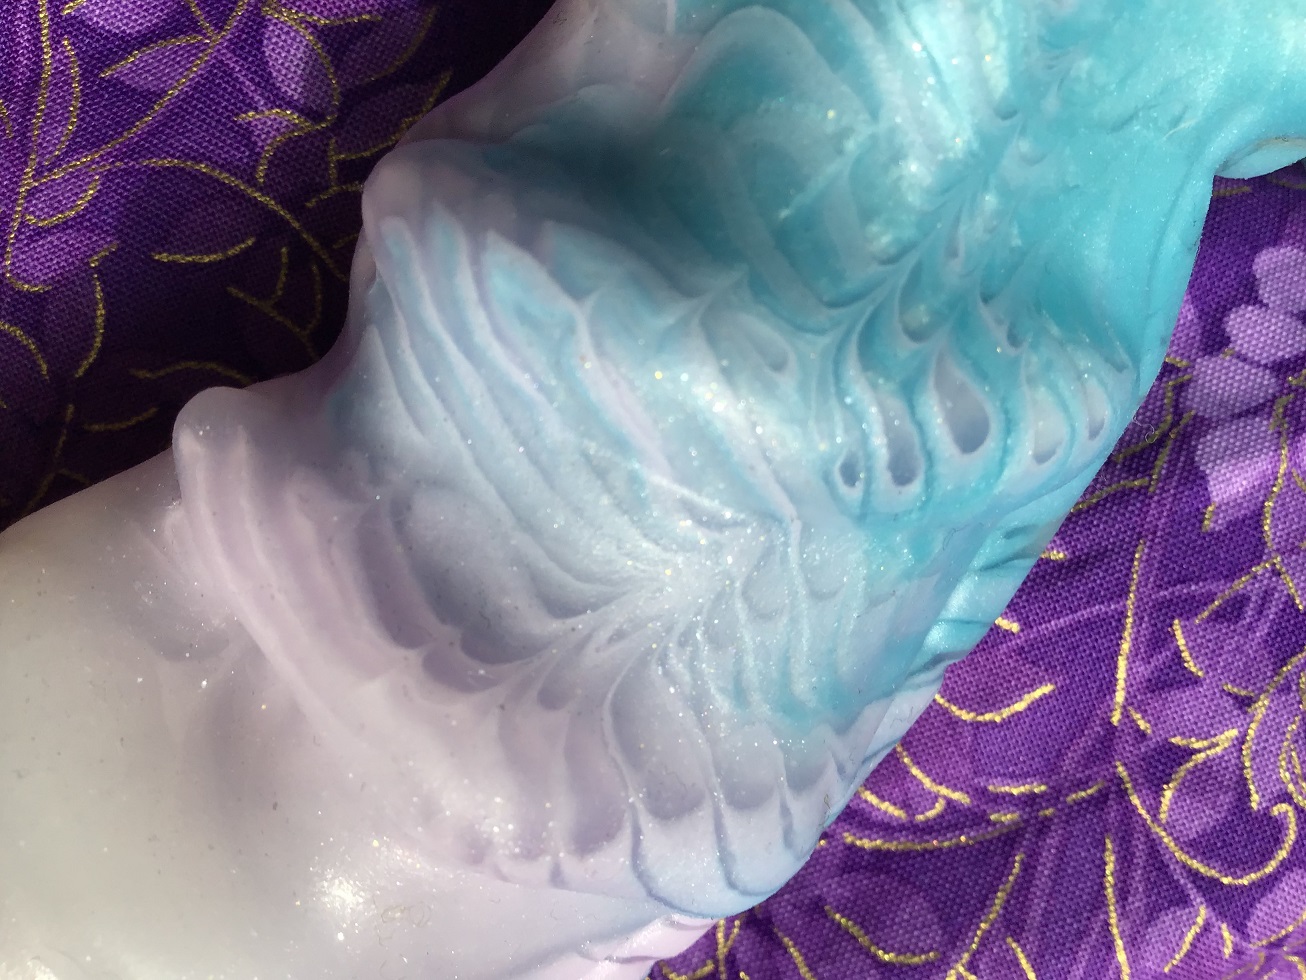 A close-up of the translucent silicone